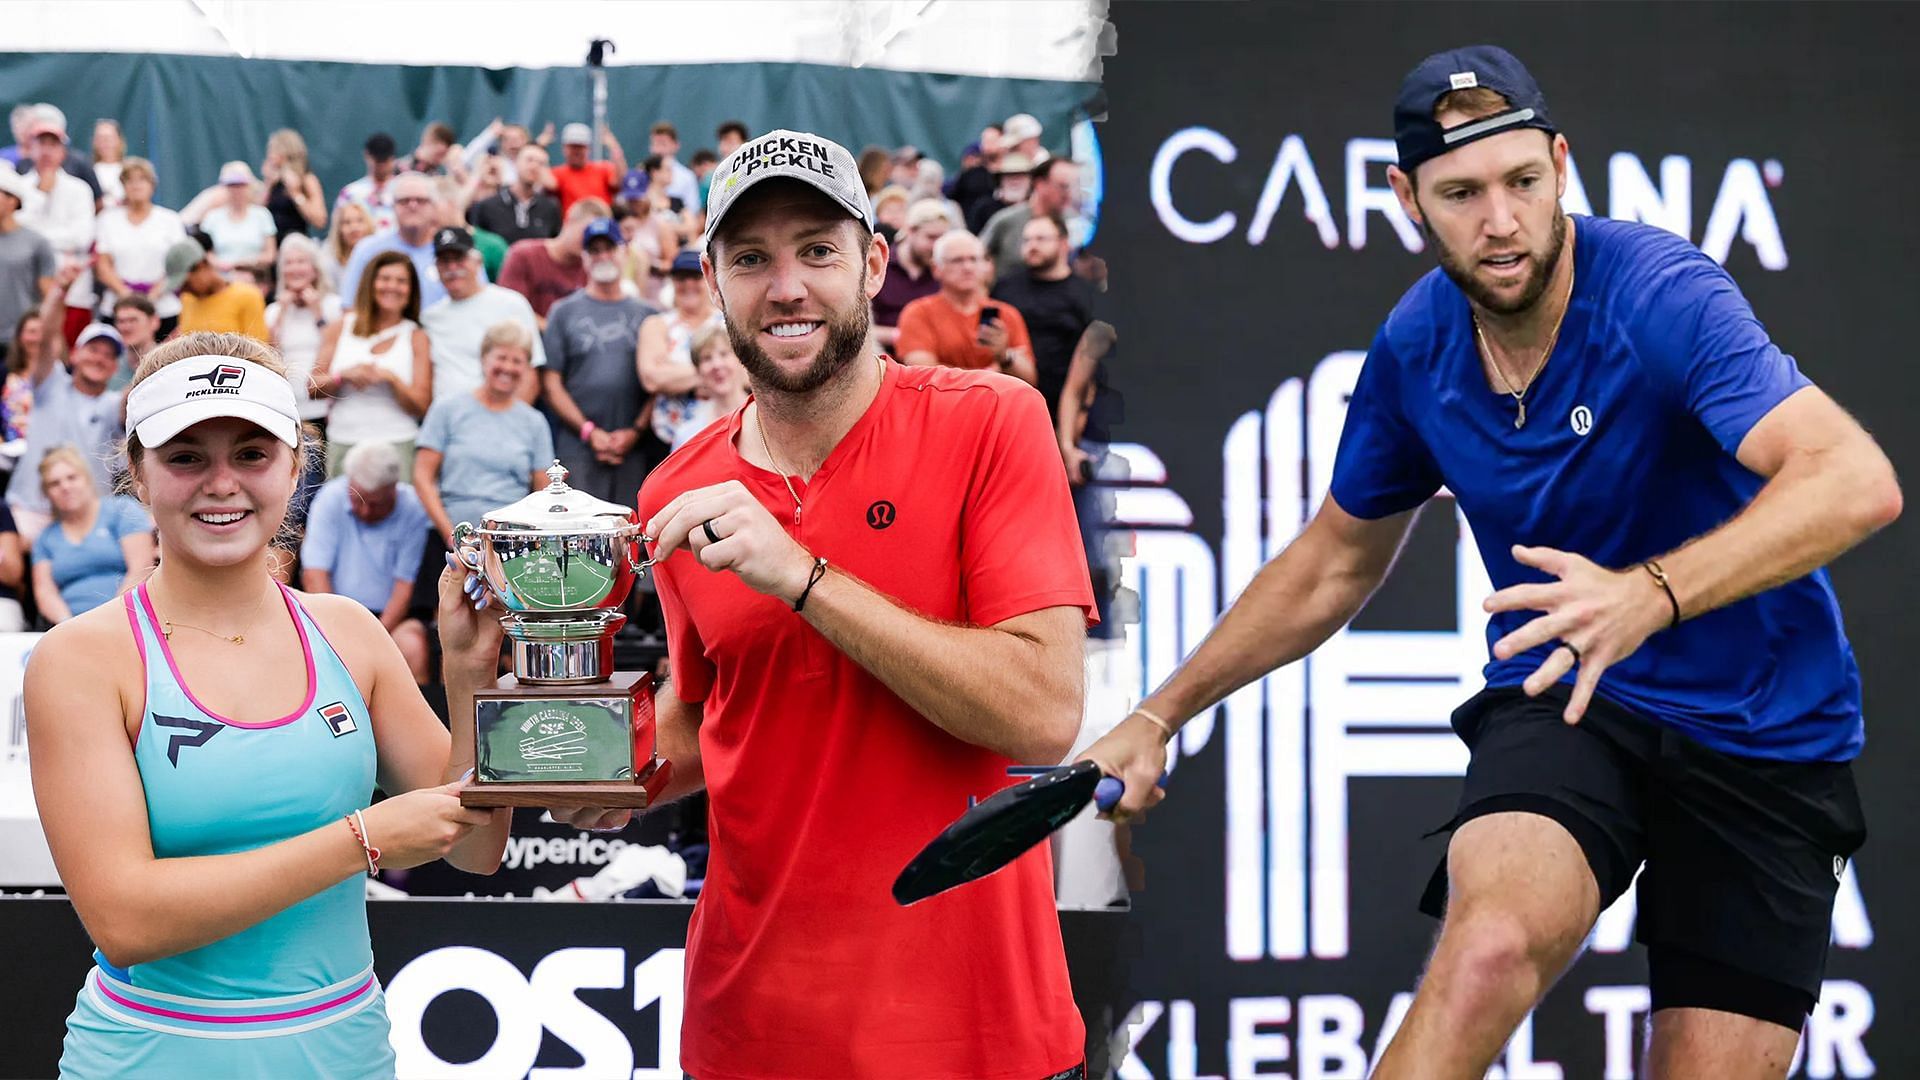 Jack Sock wins mixed doubles title in his first-ever professional pickleball tournament